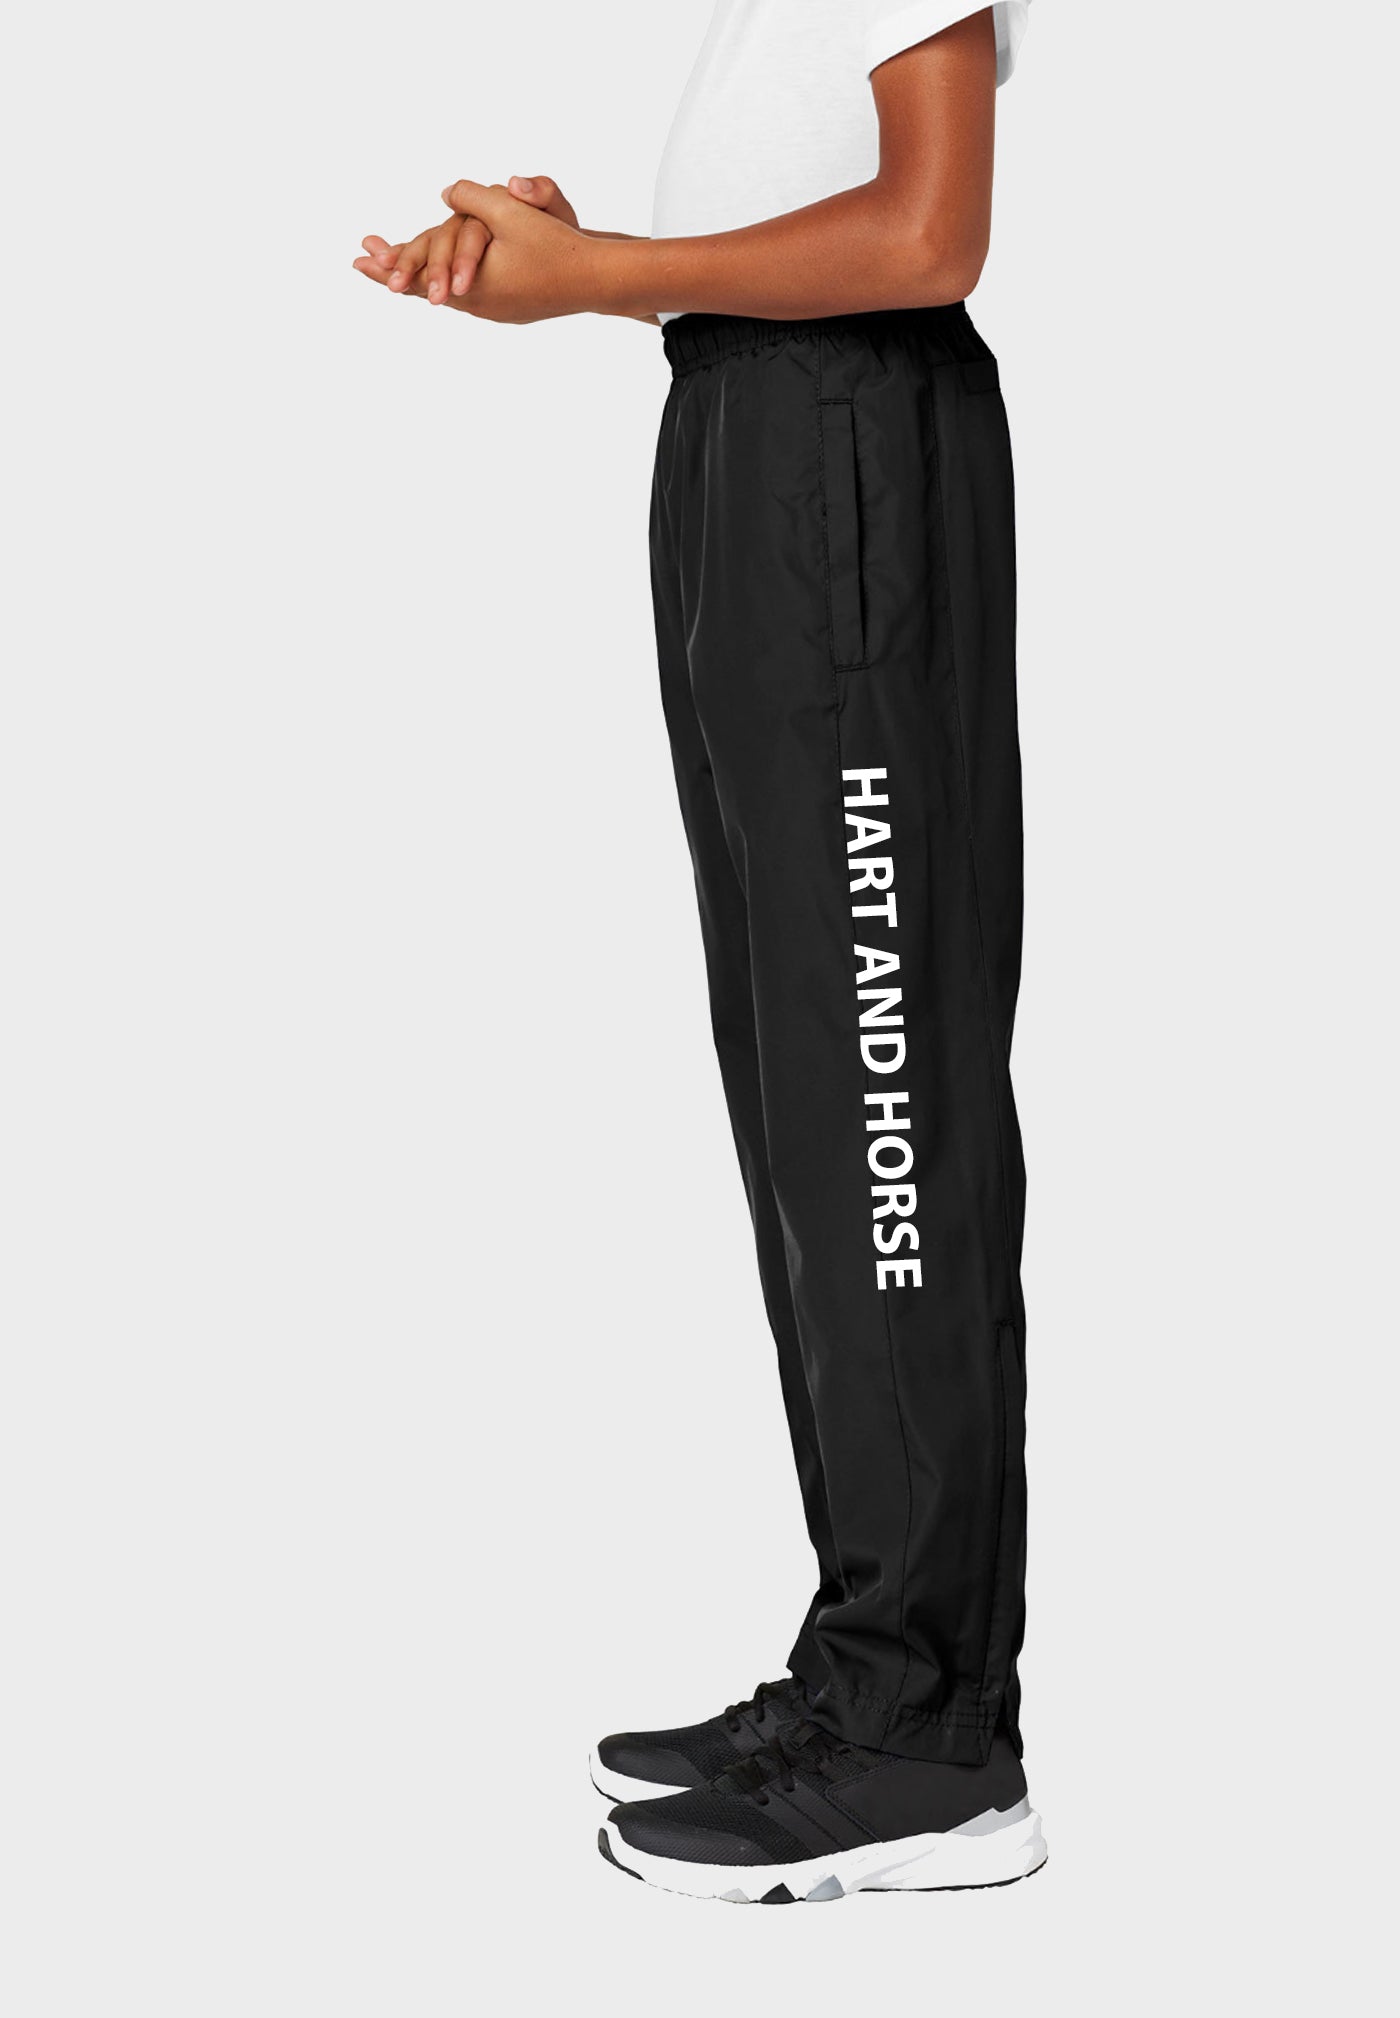 Hart and Horse Sport-Tek® Black Pull-On Wind Pant (Unisex) - Adult + Youth Sizes